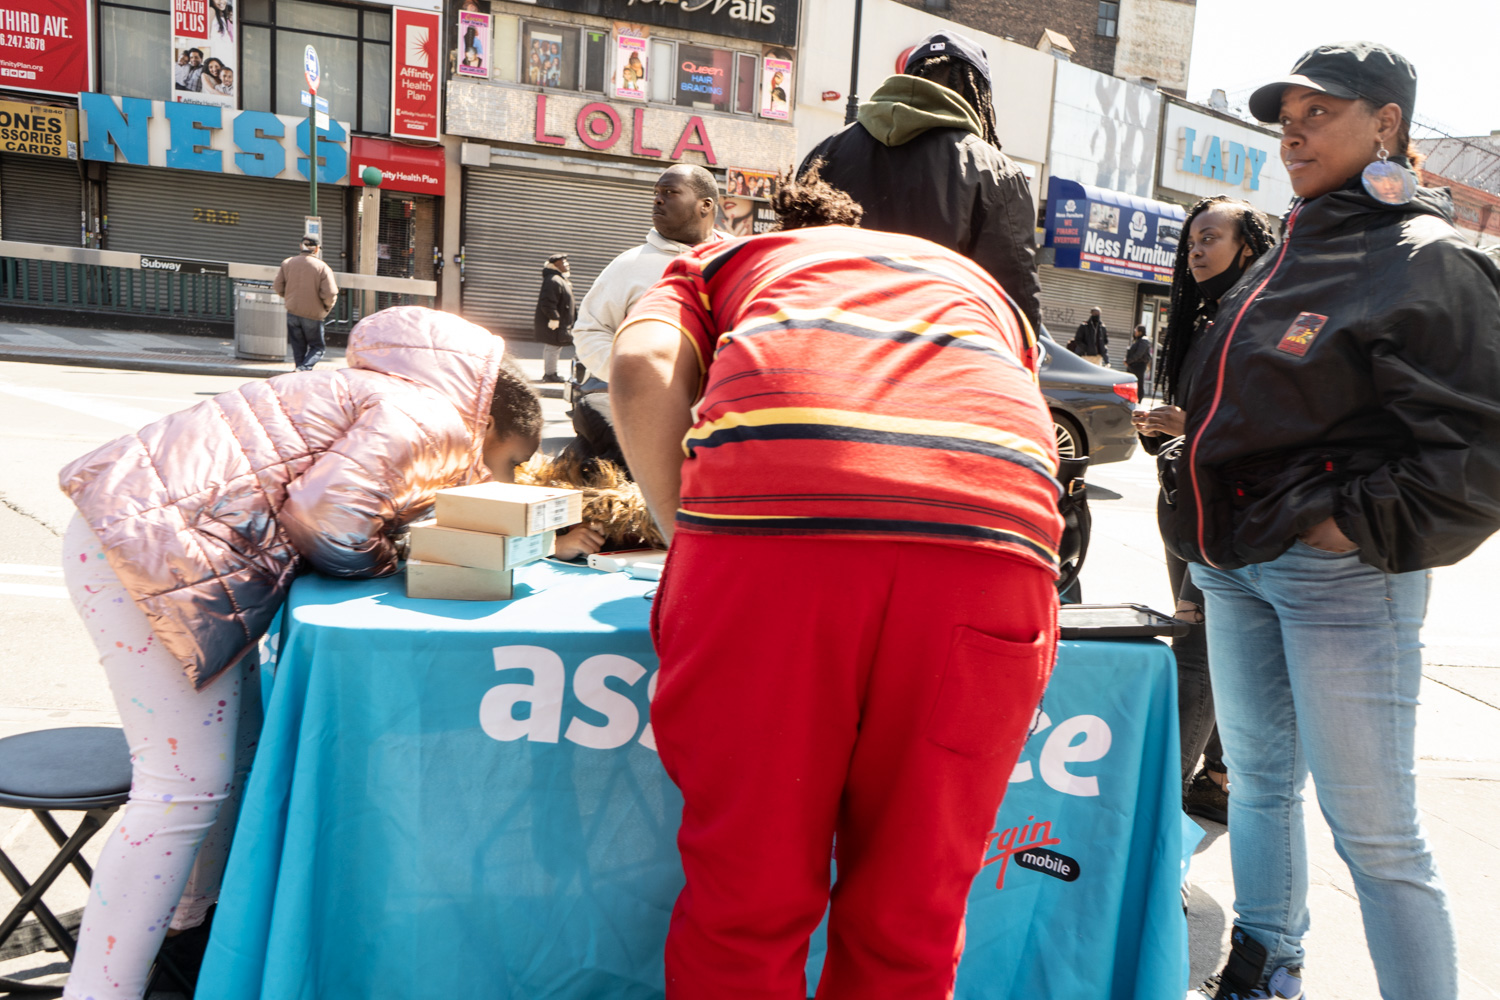 March 26, 2020: Selling Virgin Mobile services at East 149th Street and Third Avenue, Bronx, New York. © Camilo José Vergara